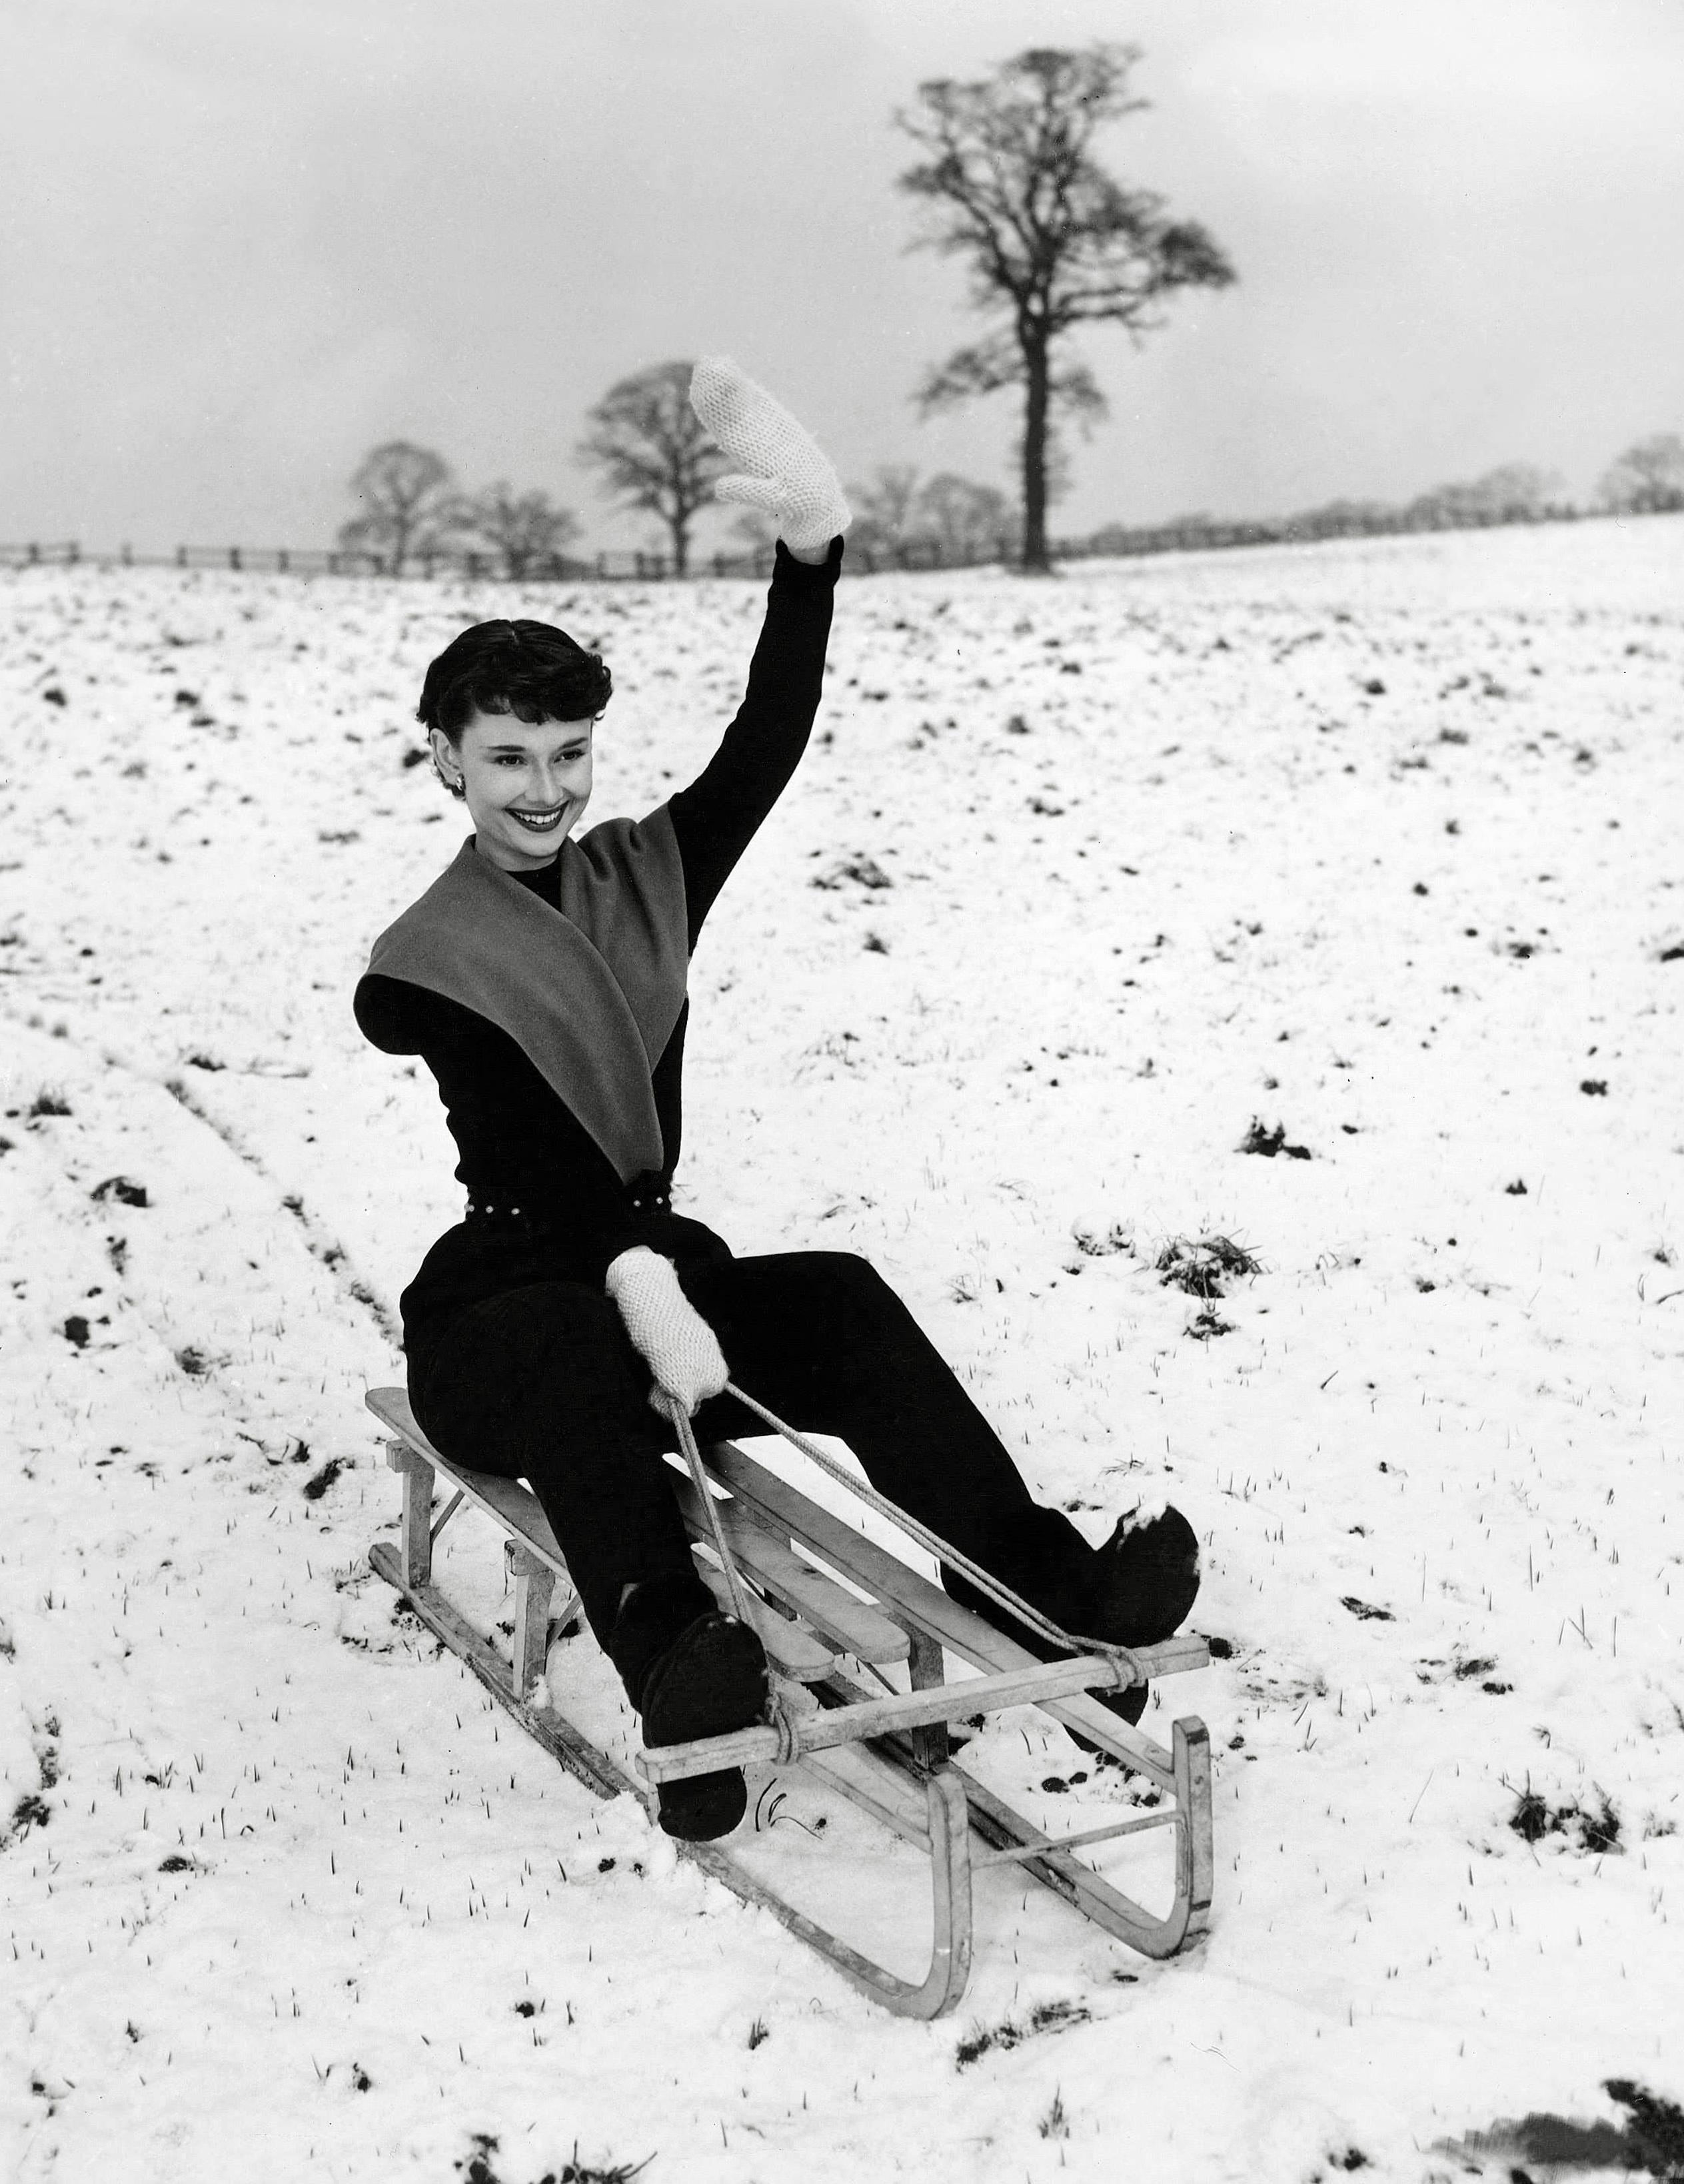 Unknown Black and White Photograph - Audrey Hepburn in the Snow Globe Photos Fine Art Print